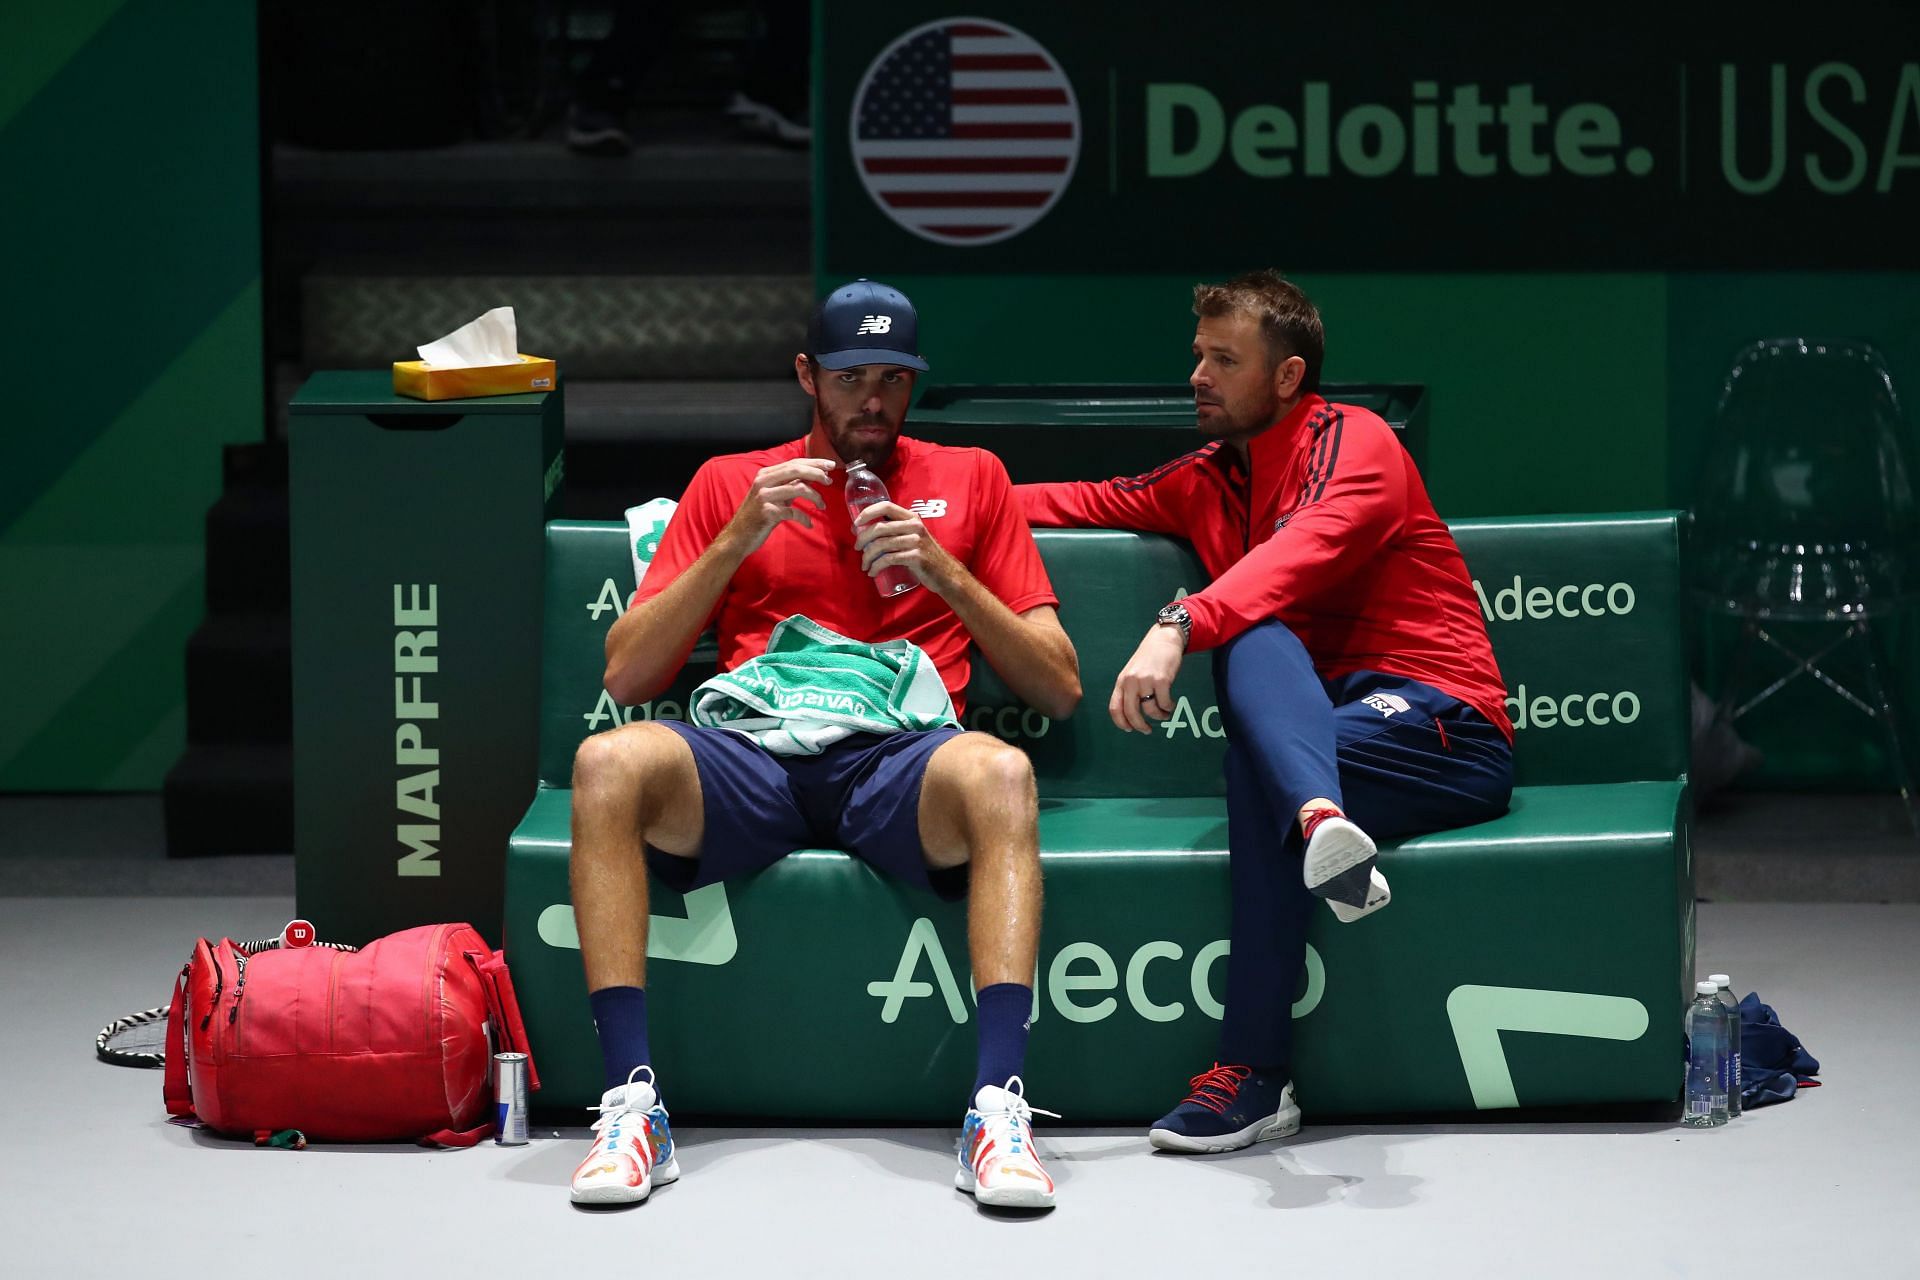 Reily Opelka and Mardy Fish at the 2019 Davis Cup - Day Two